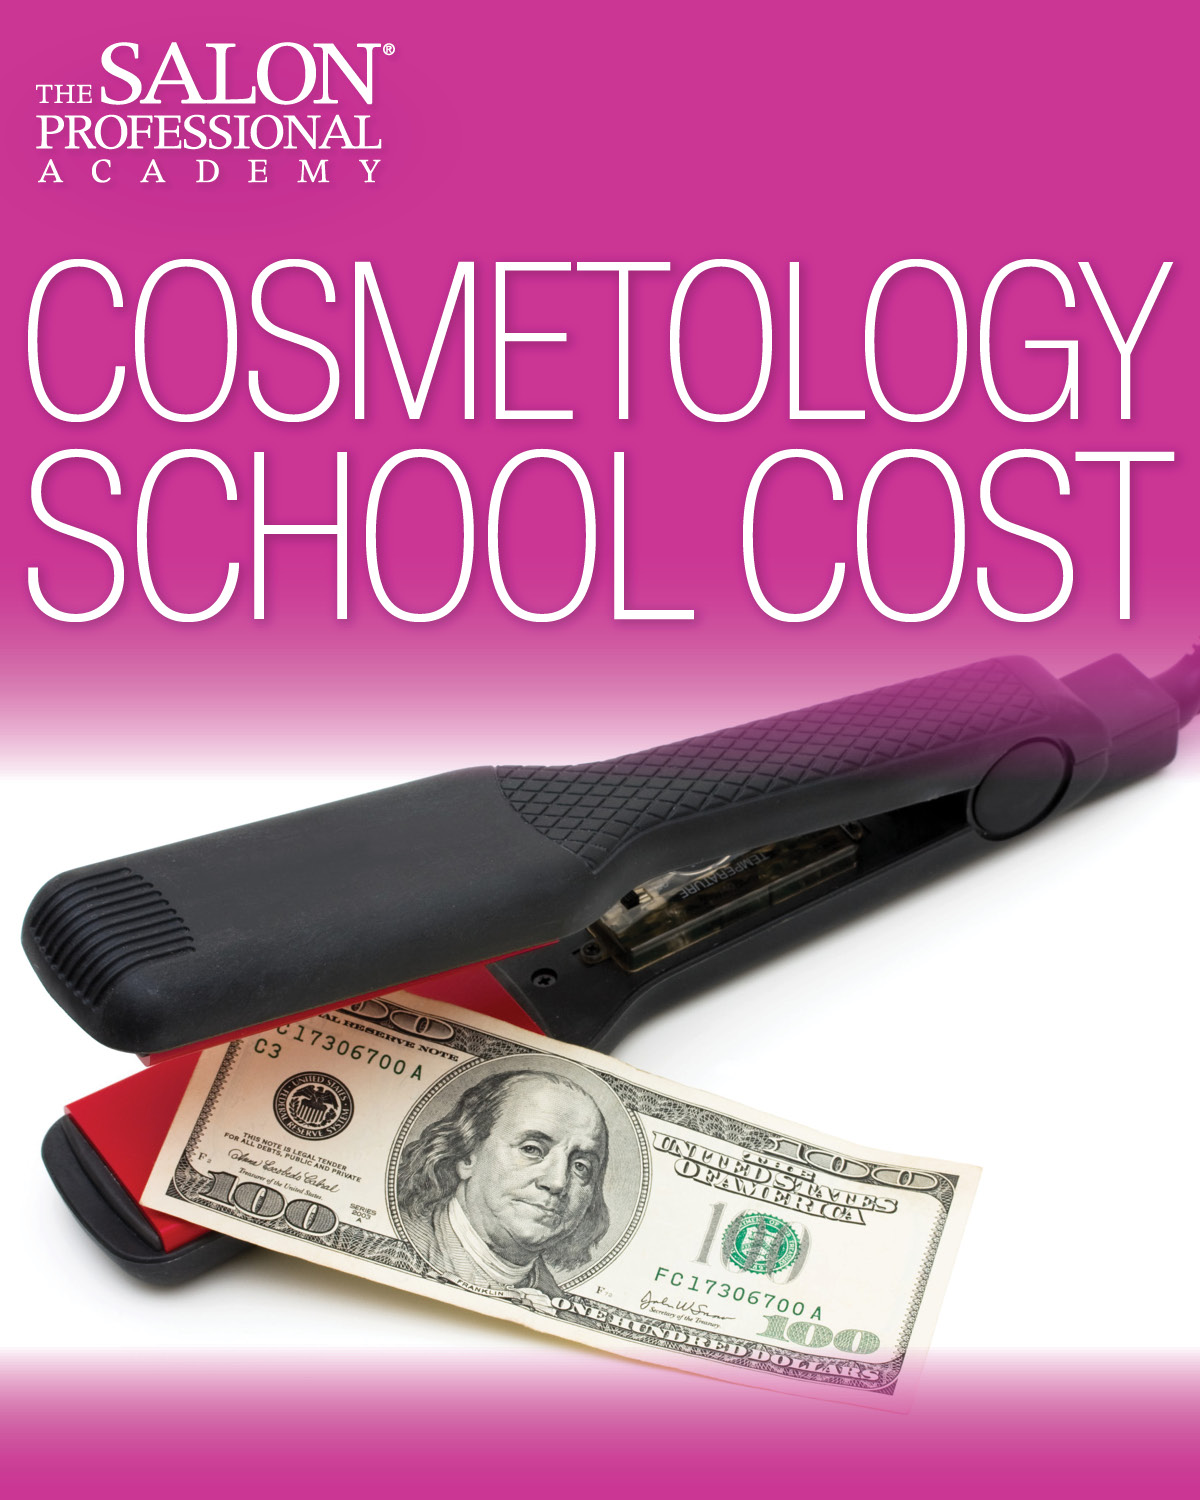 How Much Does Cosmetology School Cost?